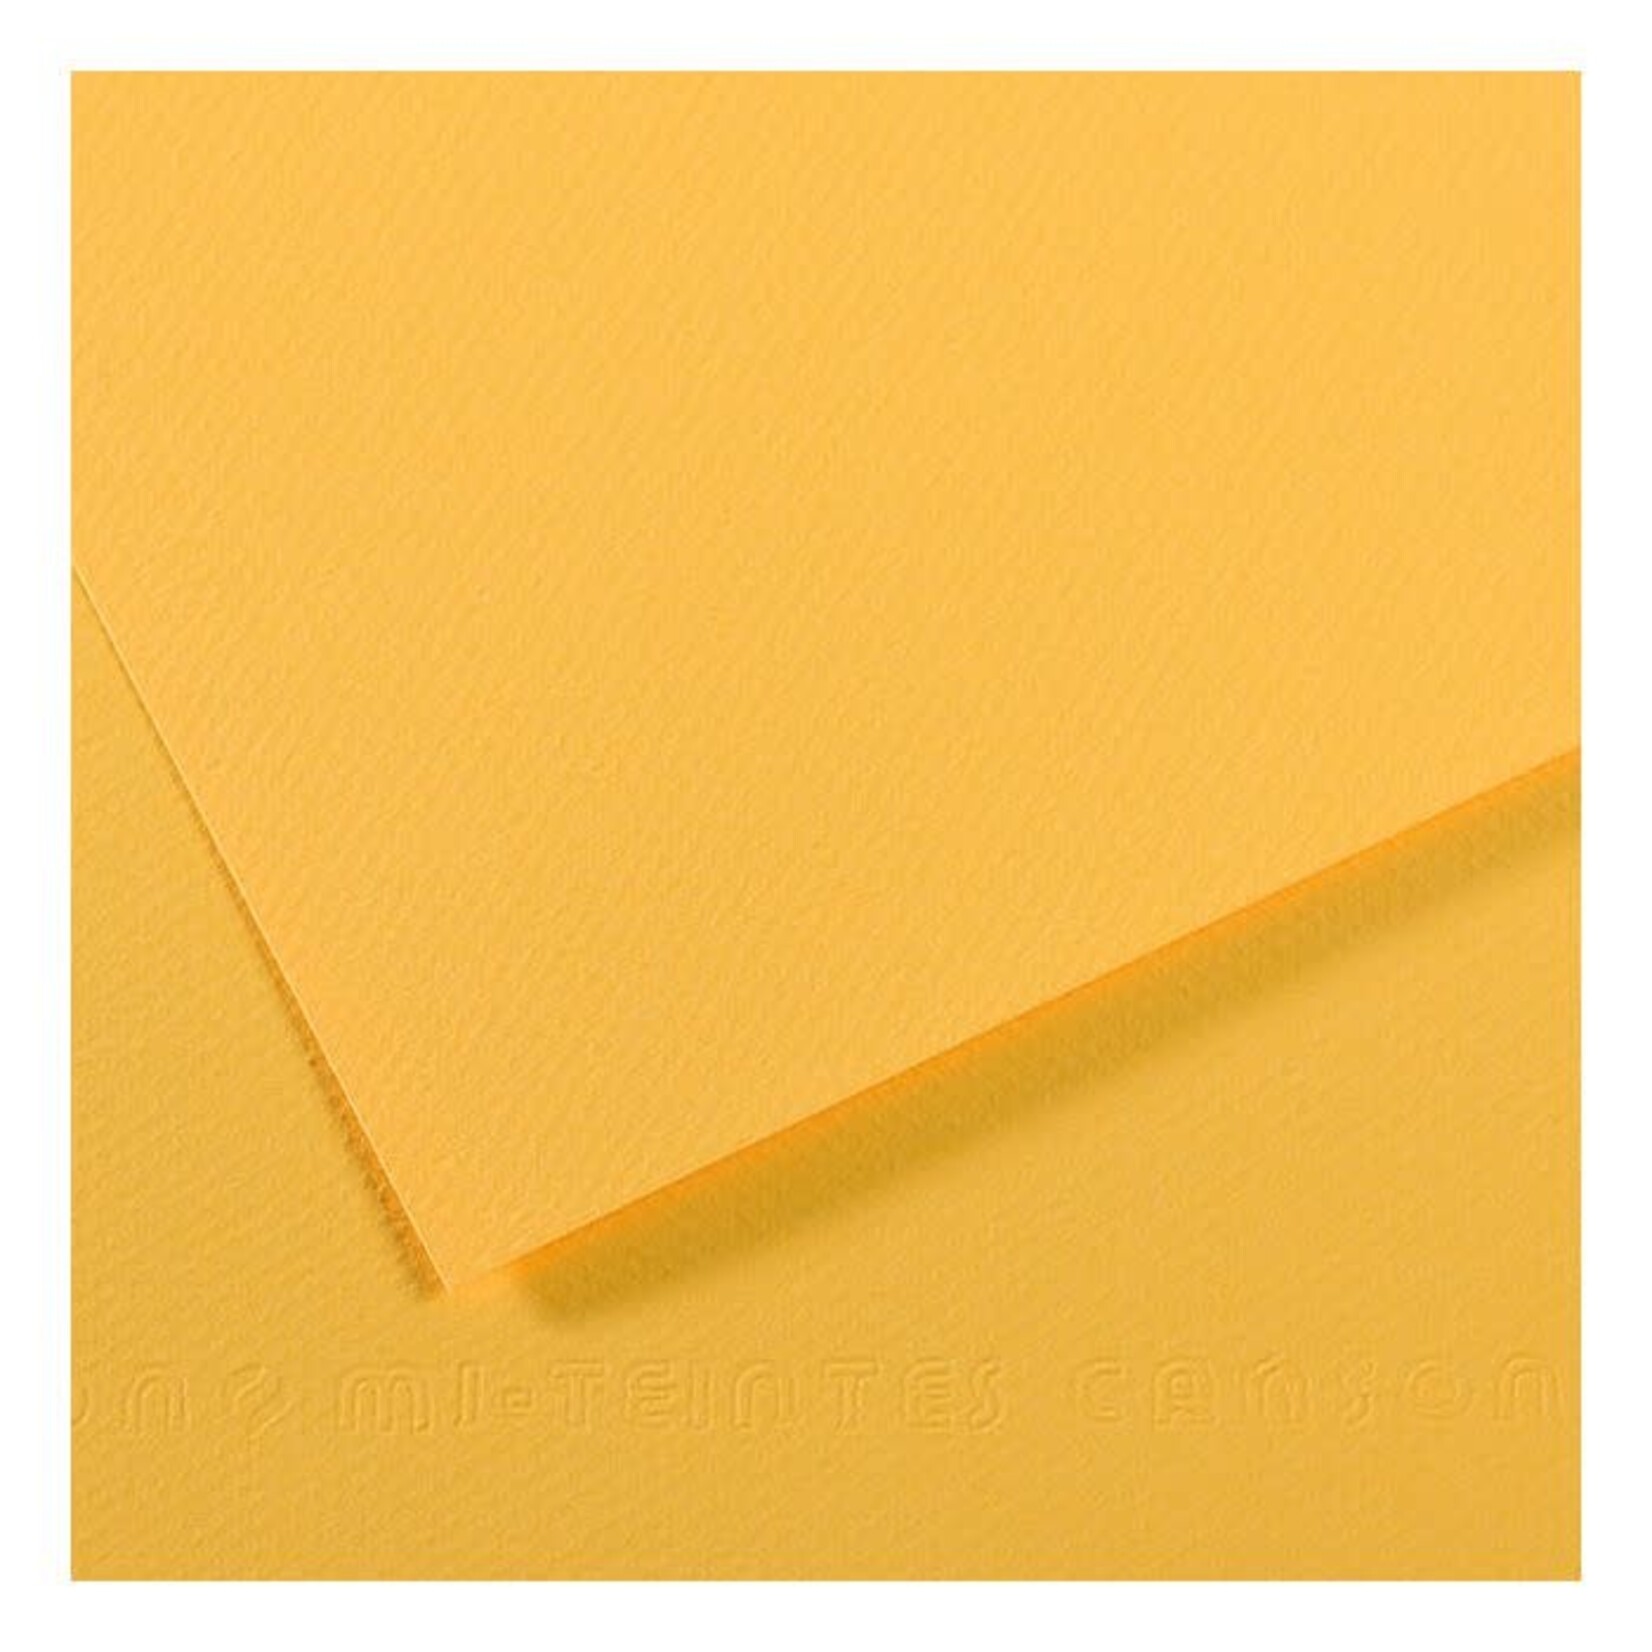 Canson Mi-Teintes Paper Sheets, 8-1/2'' x 11'', Canary